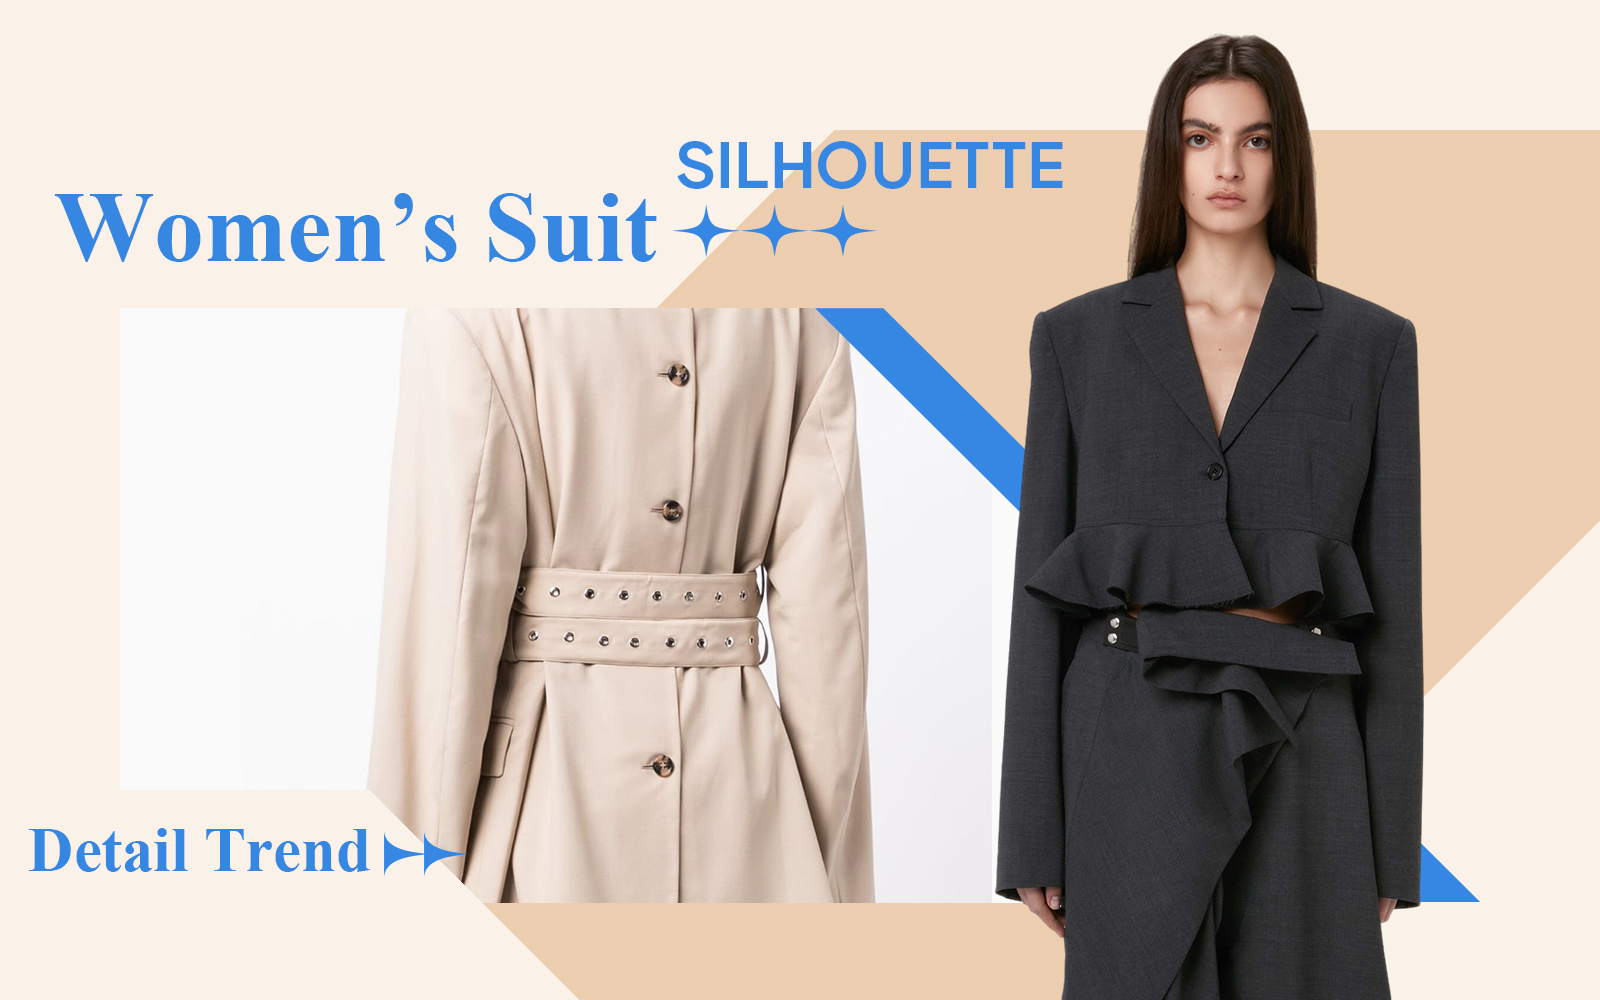 Statement Fashion -- The Detail & Craft Trend for Women's Suit